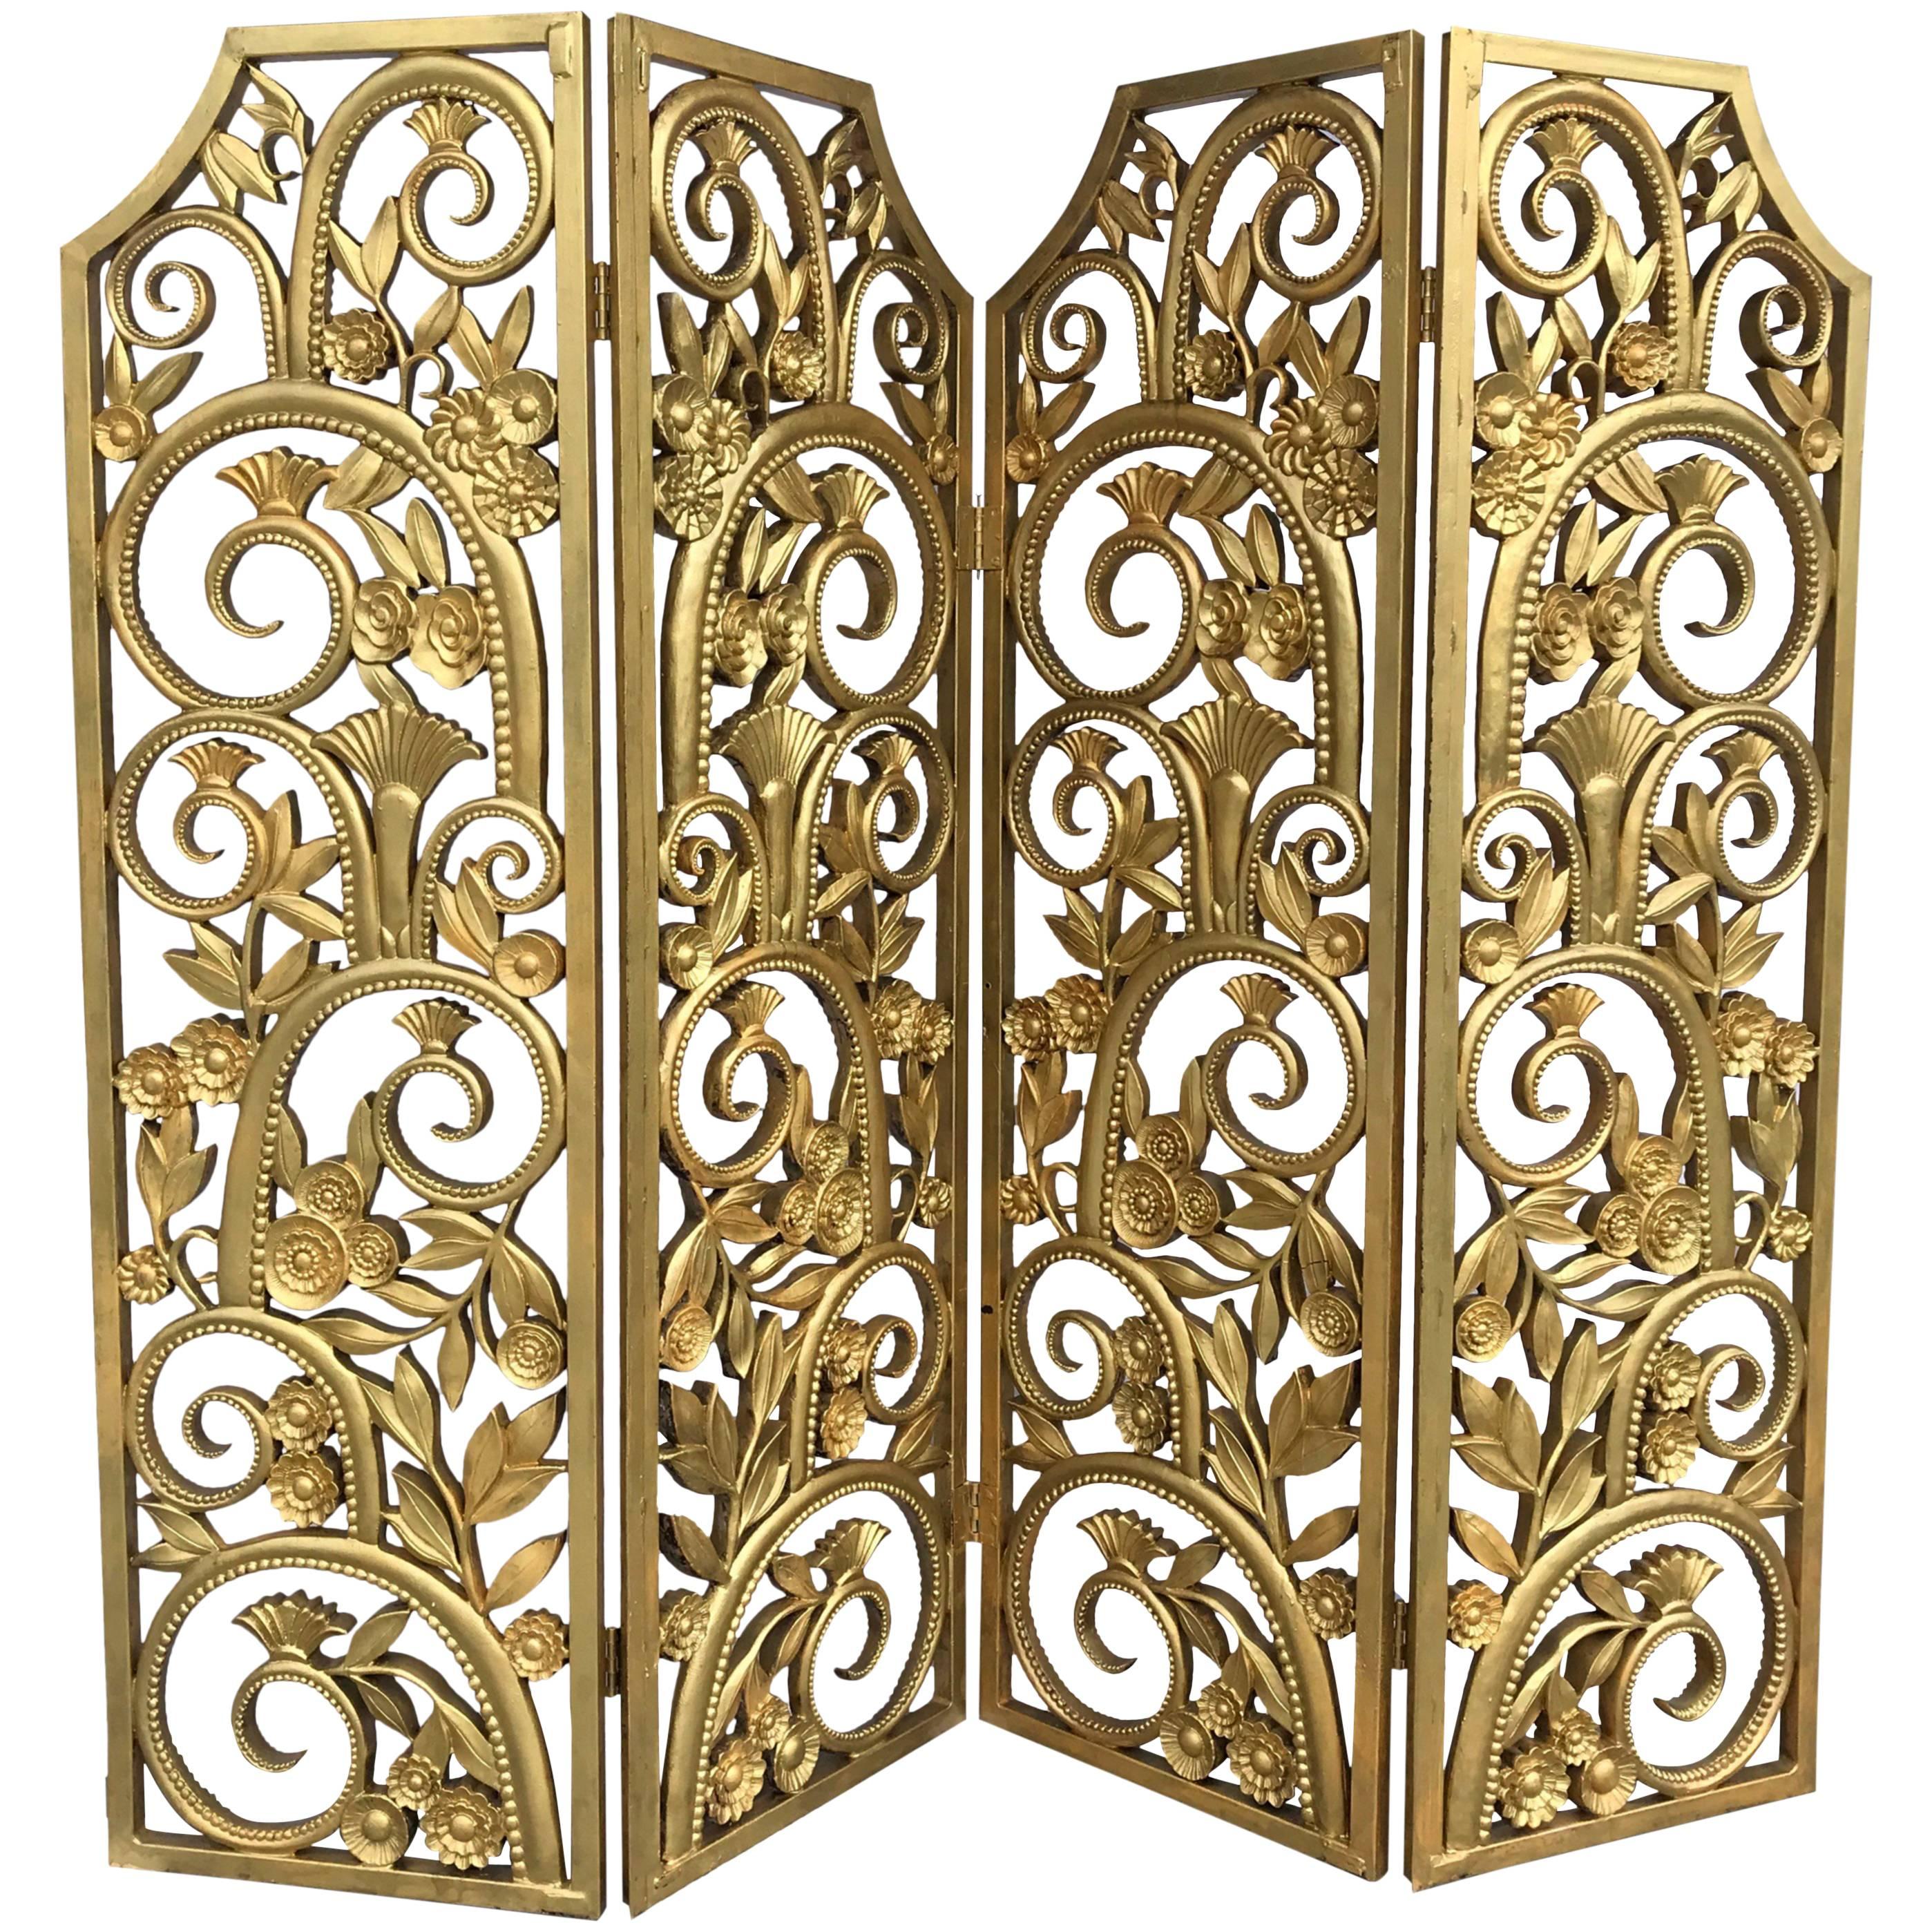 American Art Deco Four-Panel Gilded Metal and Composite Room Divider